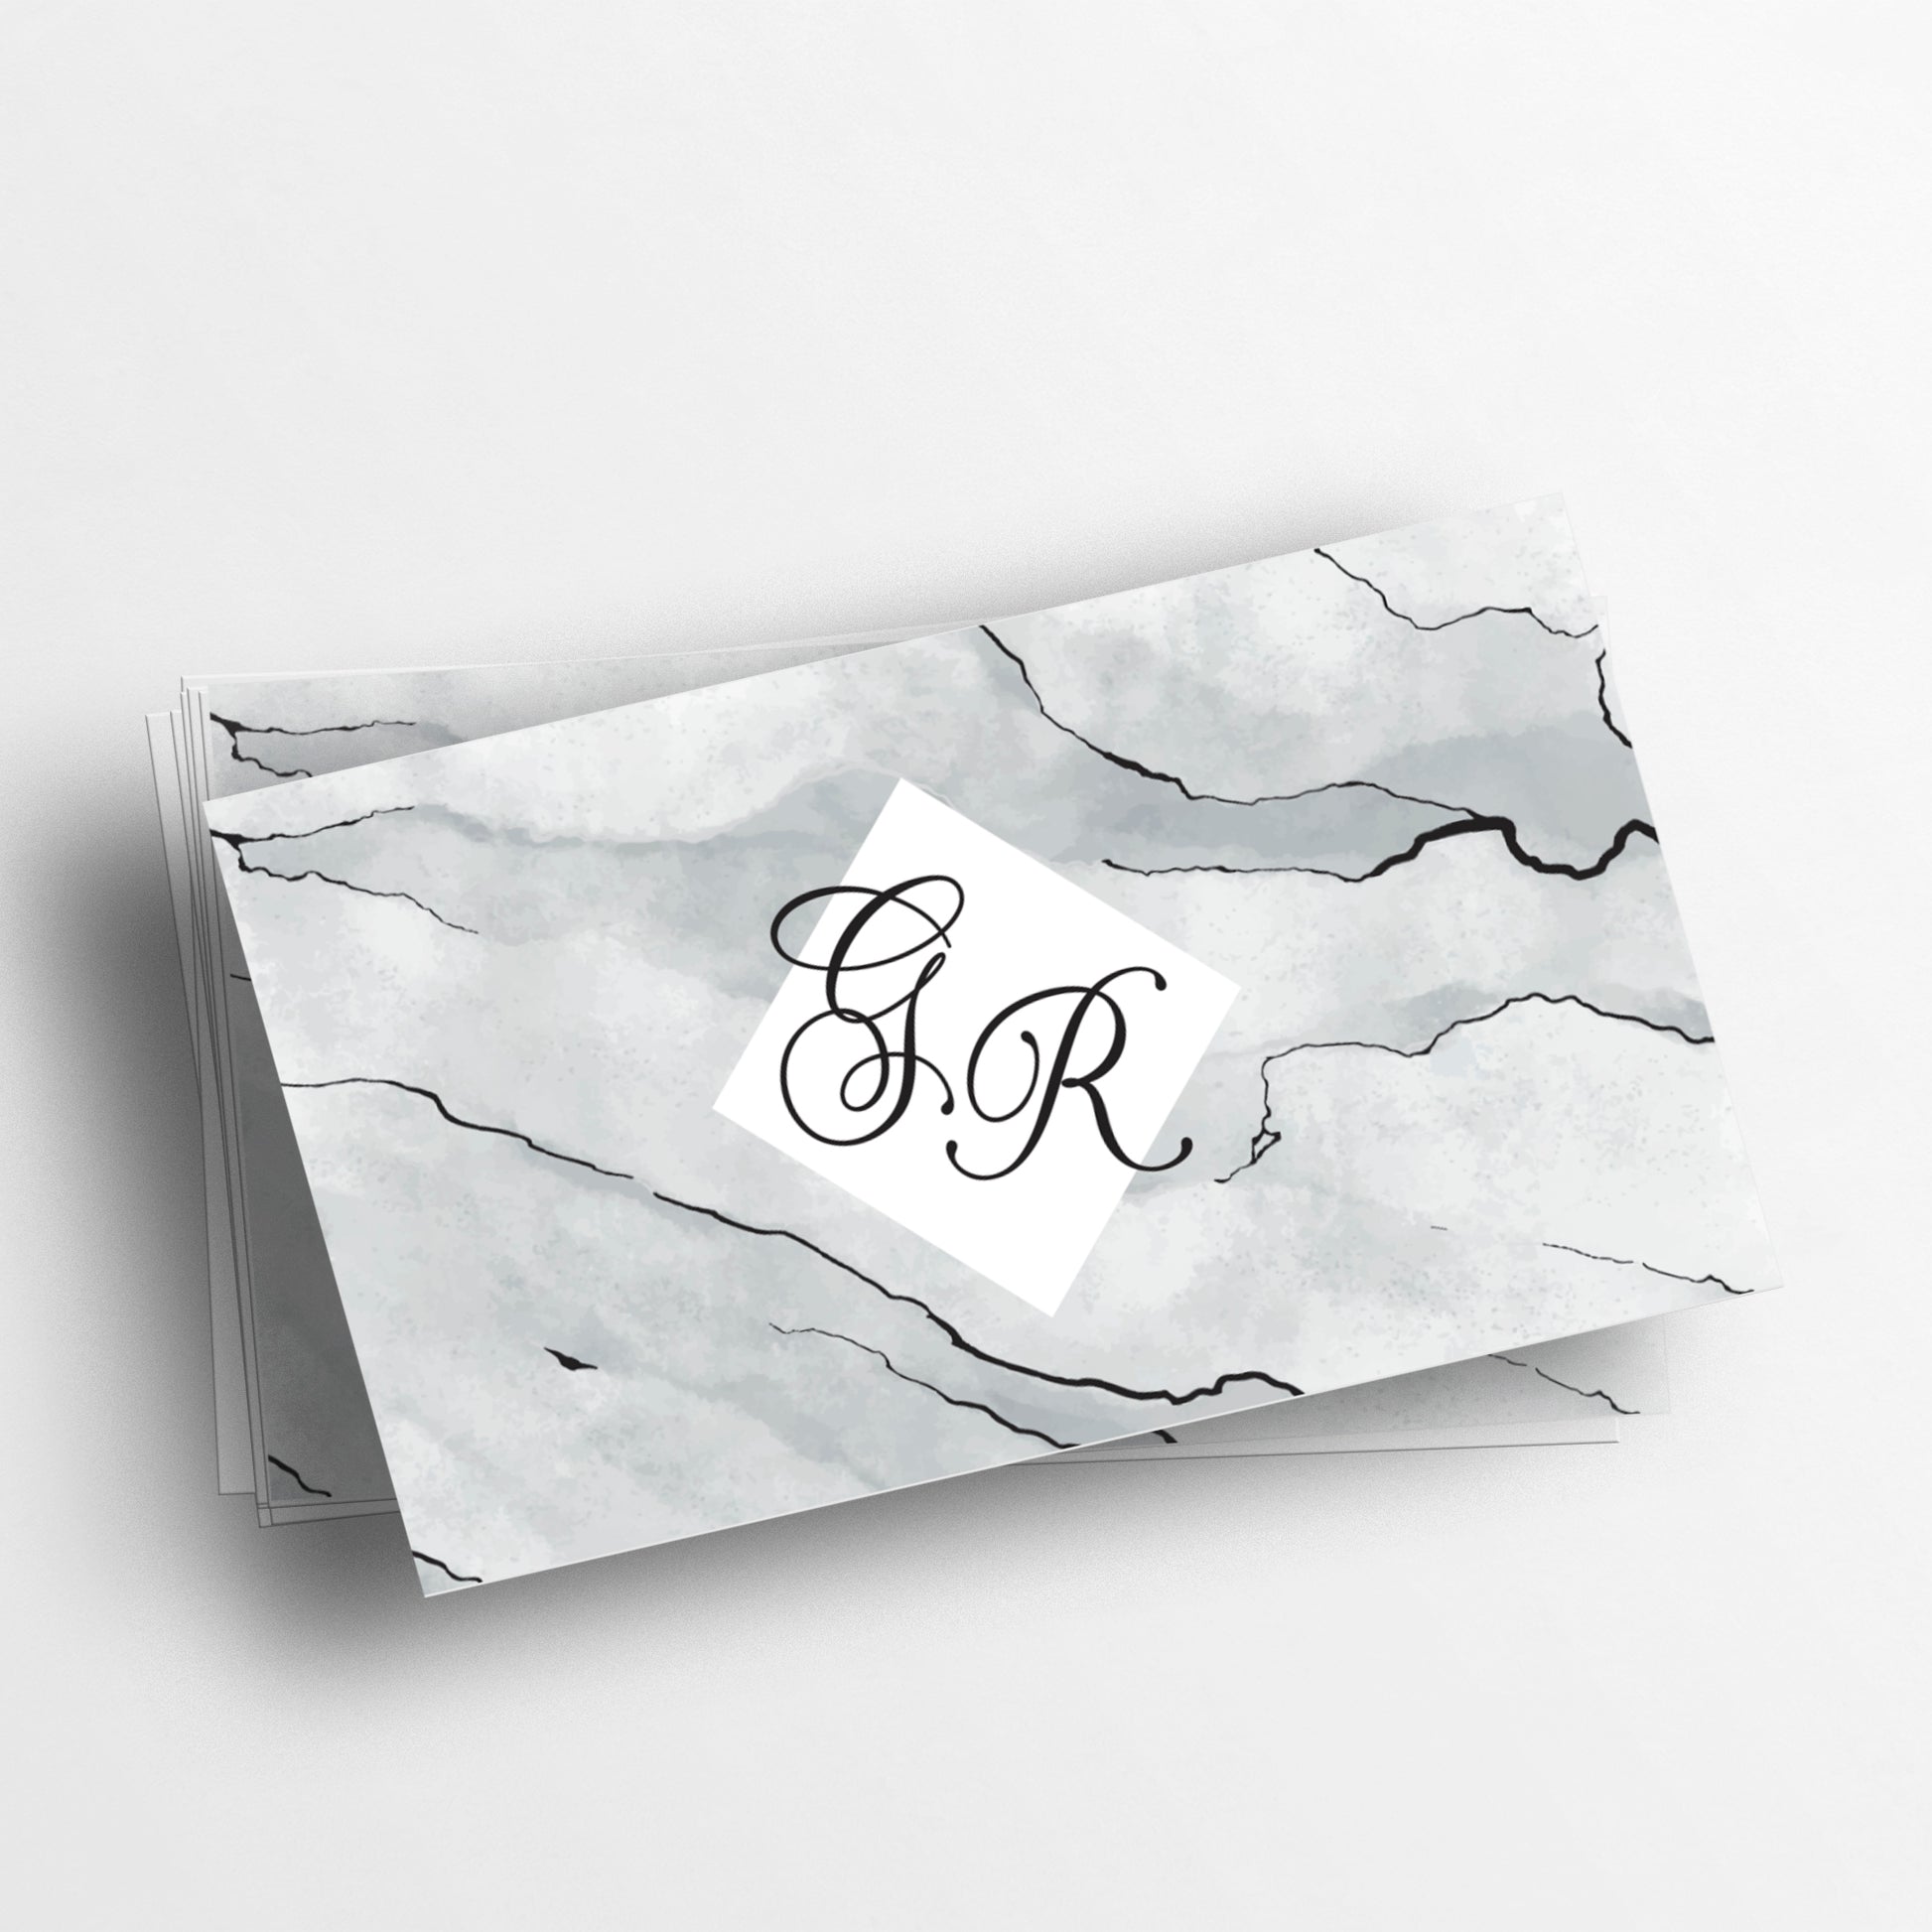 Personalized Business Cards - Elegant Marble Design with Monograms - Reflecting Professionalism and Style - XOXOKristen